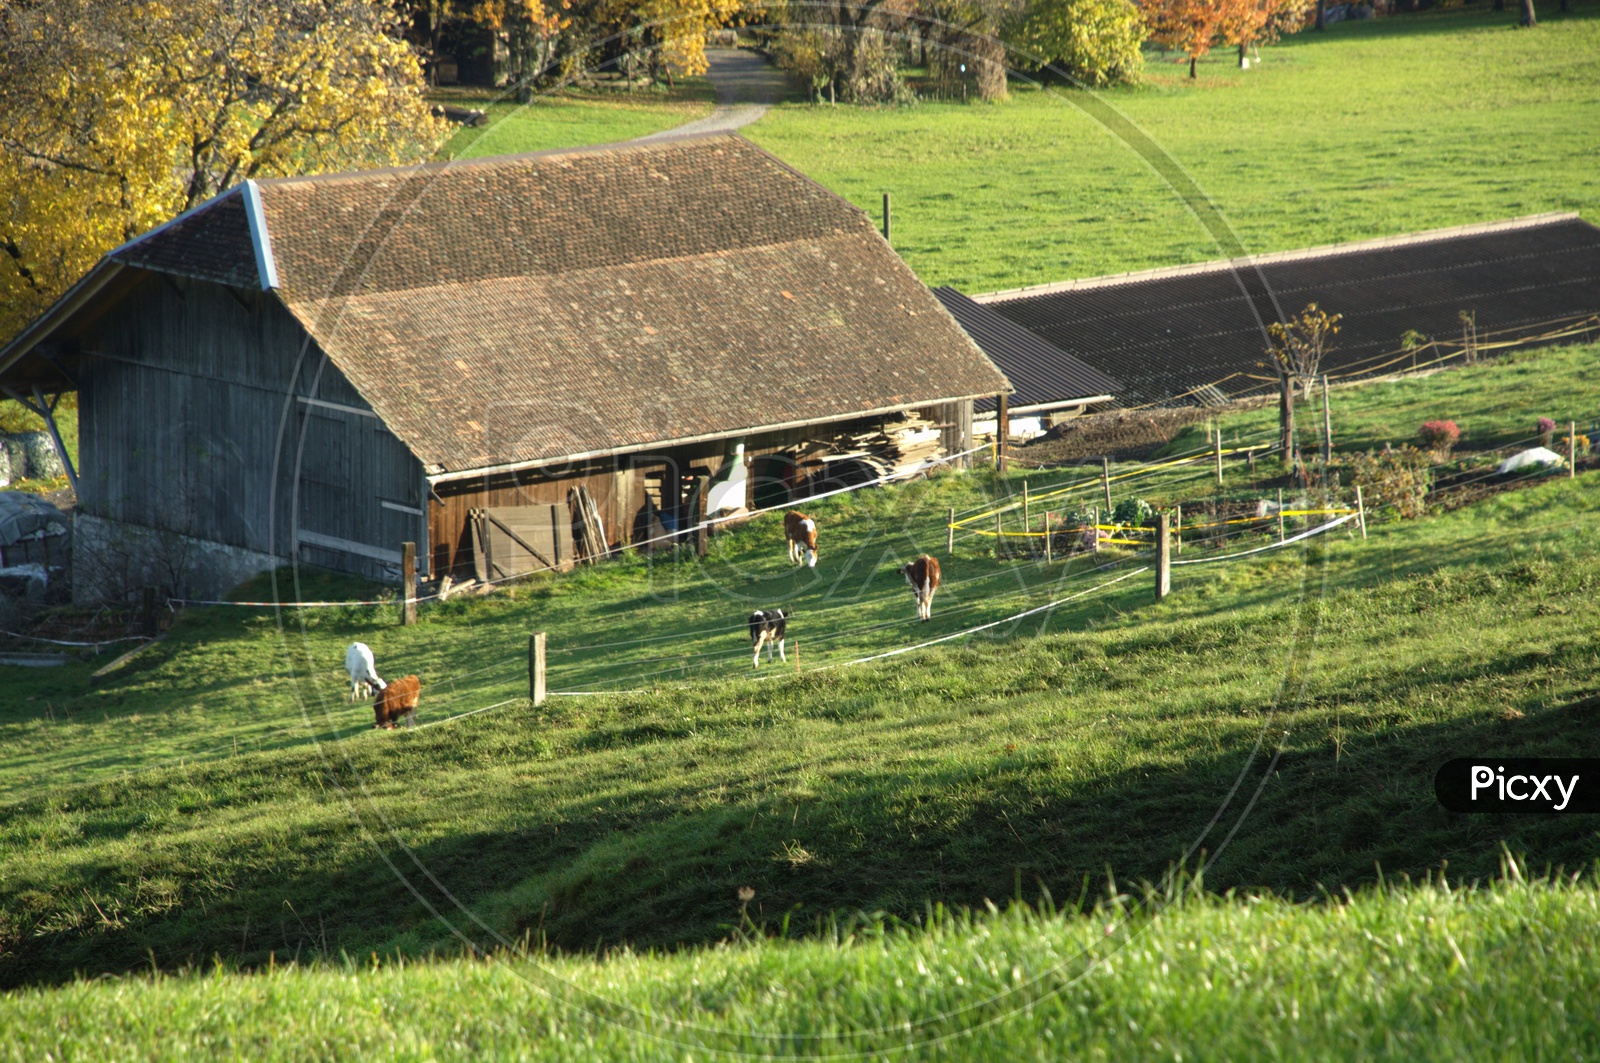 Houses with cattle grazing and greenery around